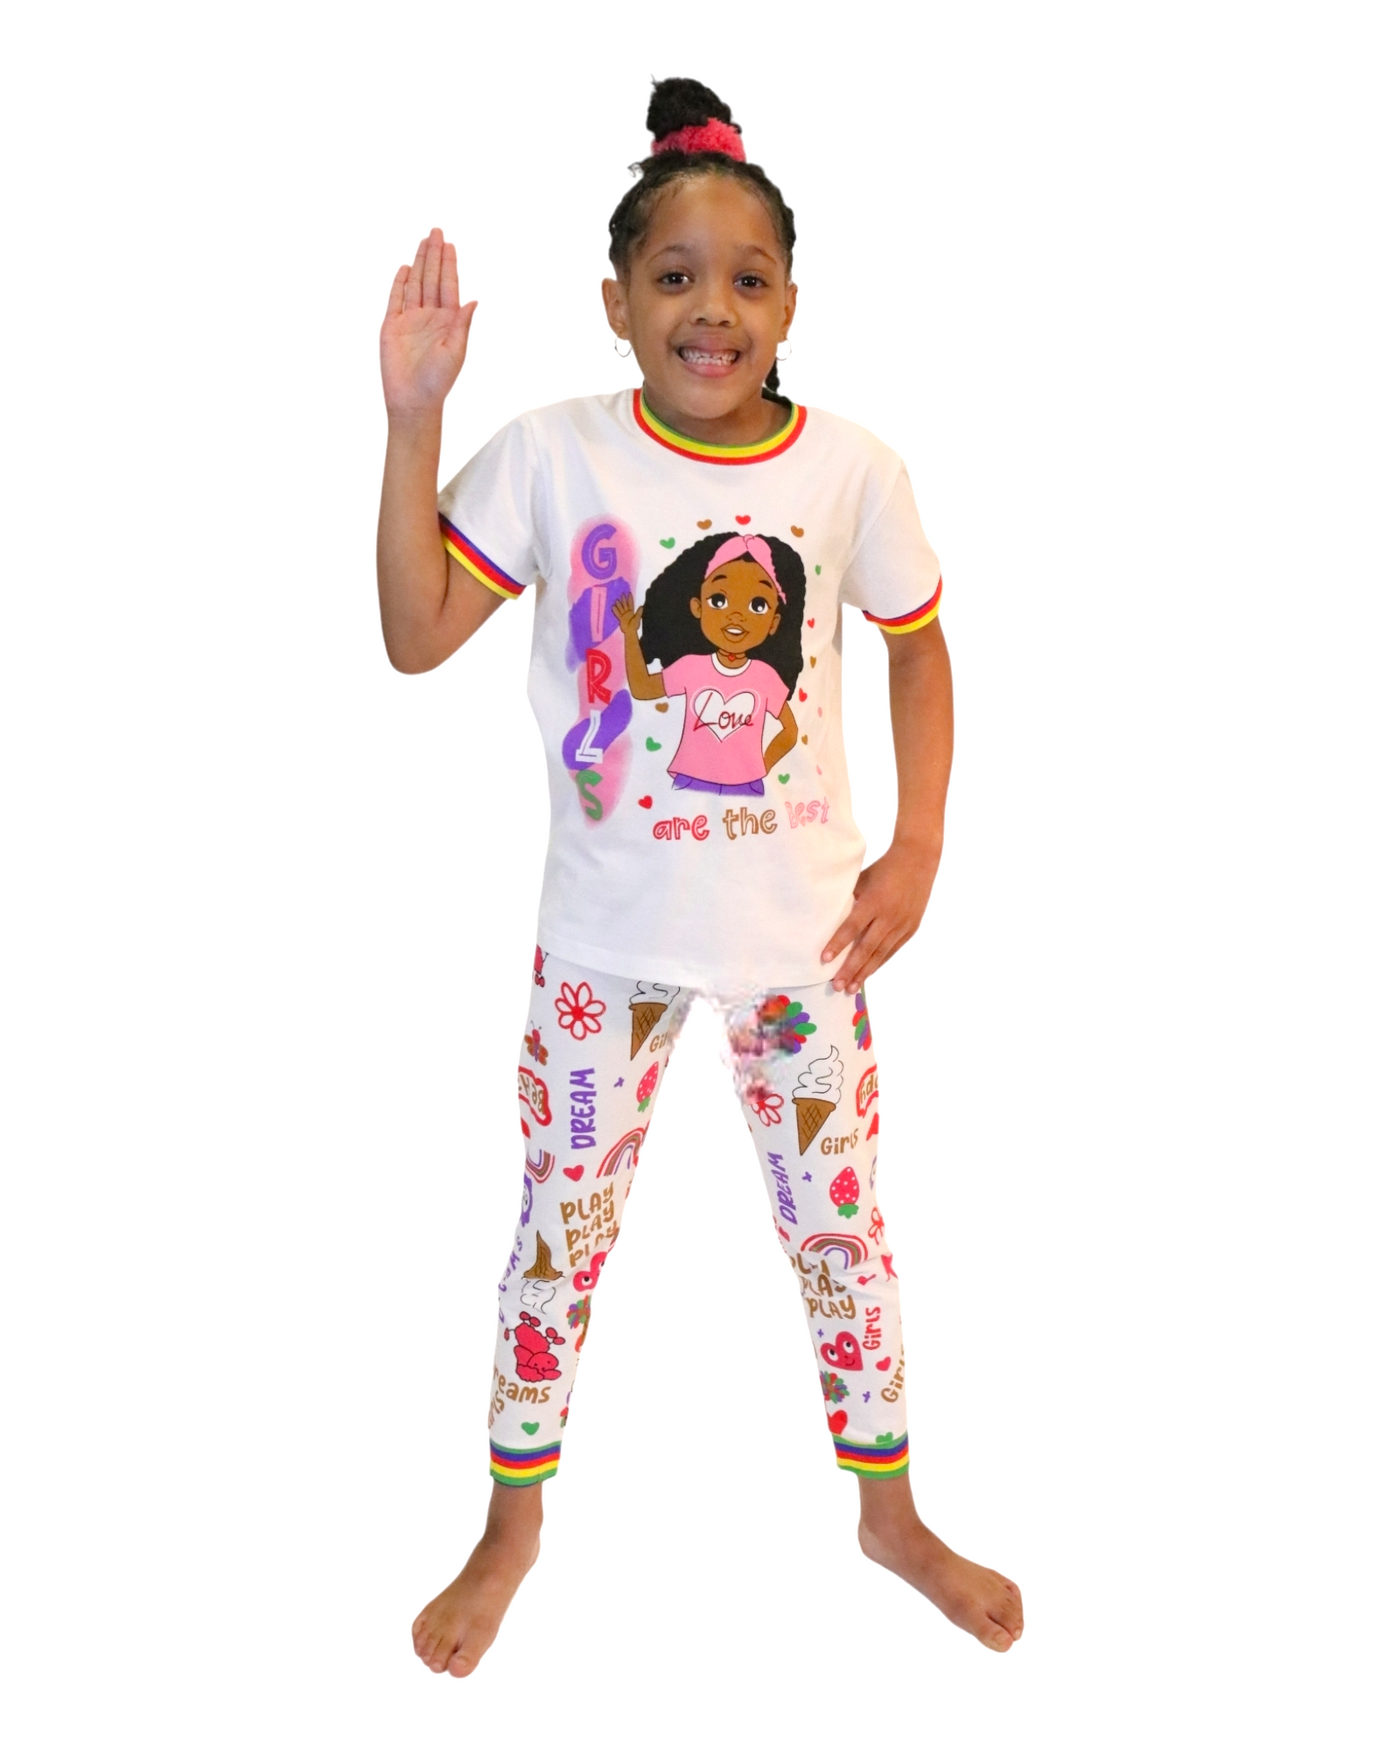 GIRLS ARE THE BEST PAJAMA 2 PC SET GIRL TODDLER 2T - 14